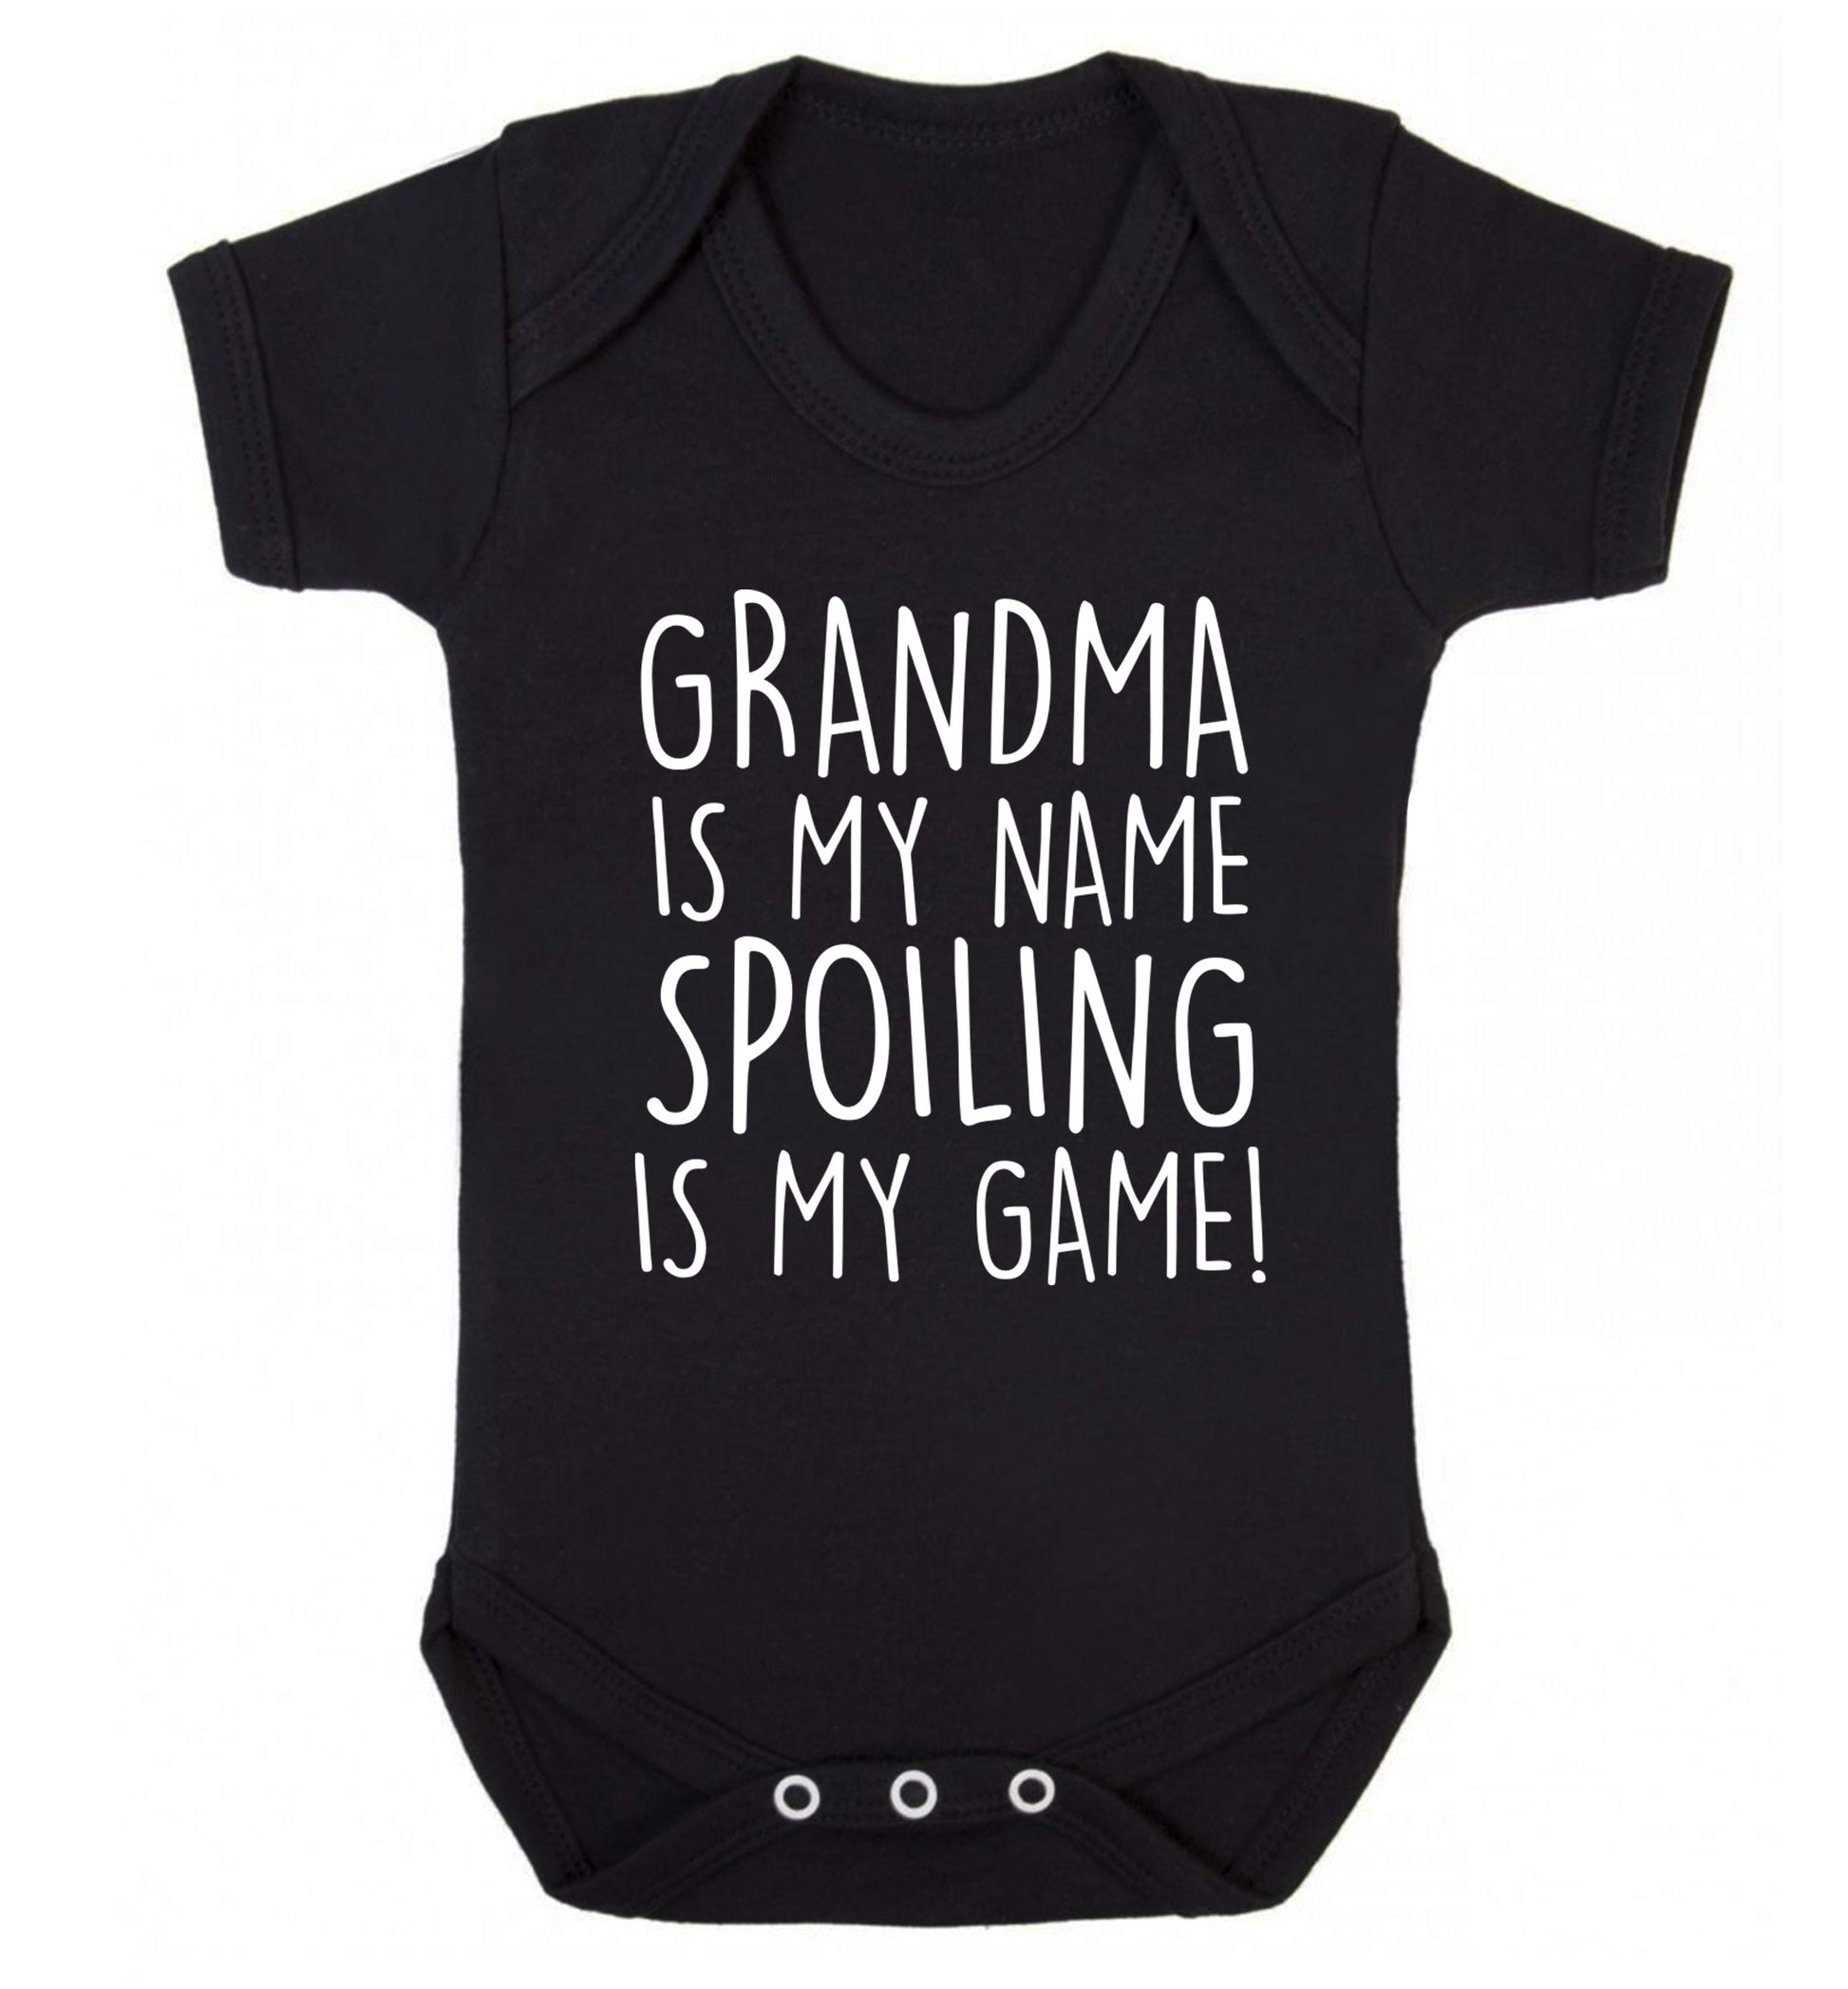 Grandma is my name, spoiling is my game Baby Vest black 18-24 months